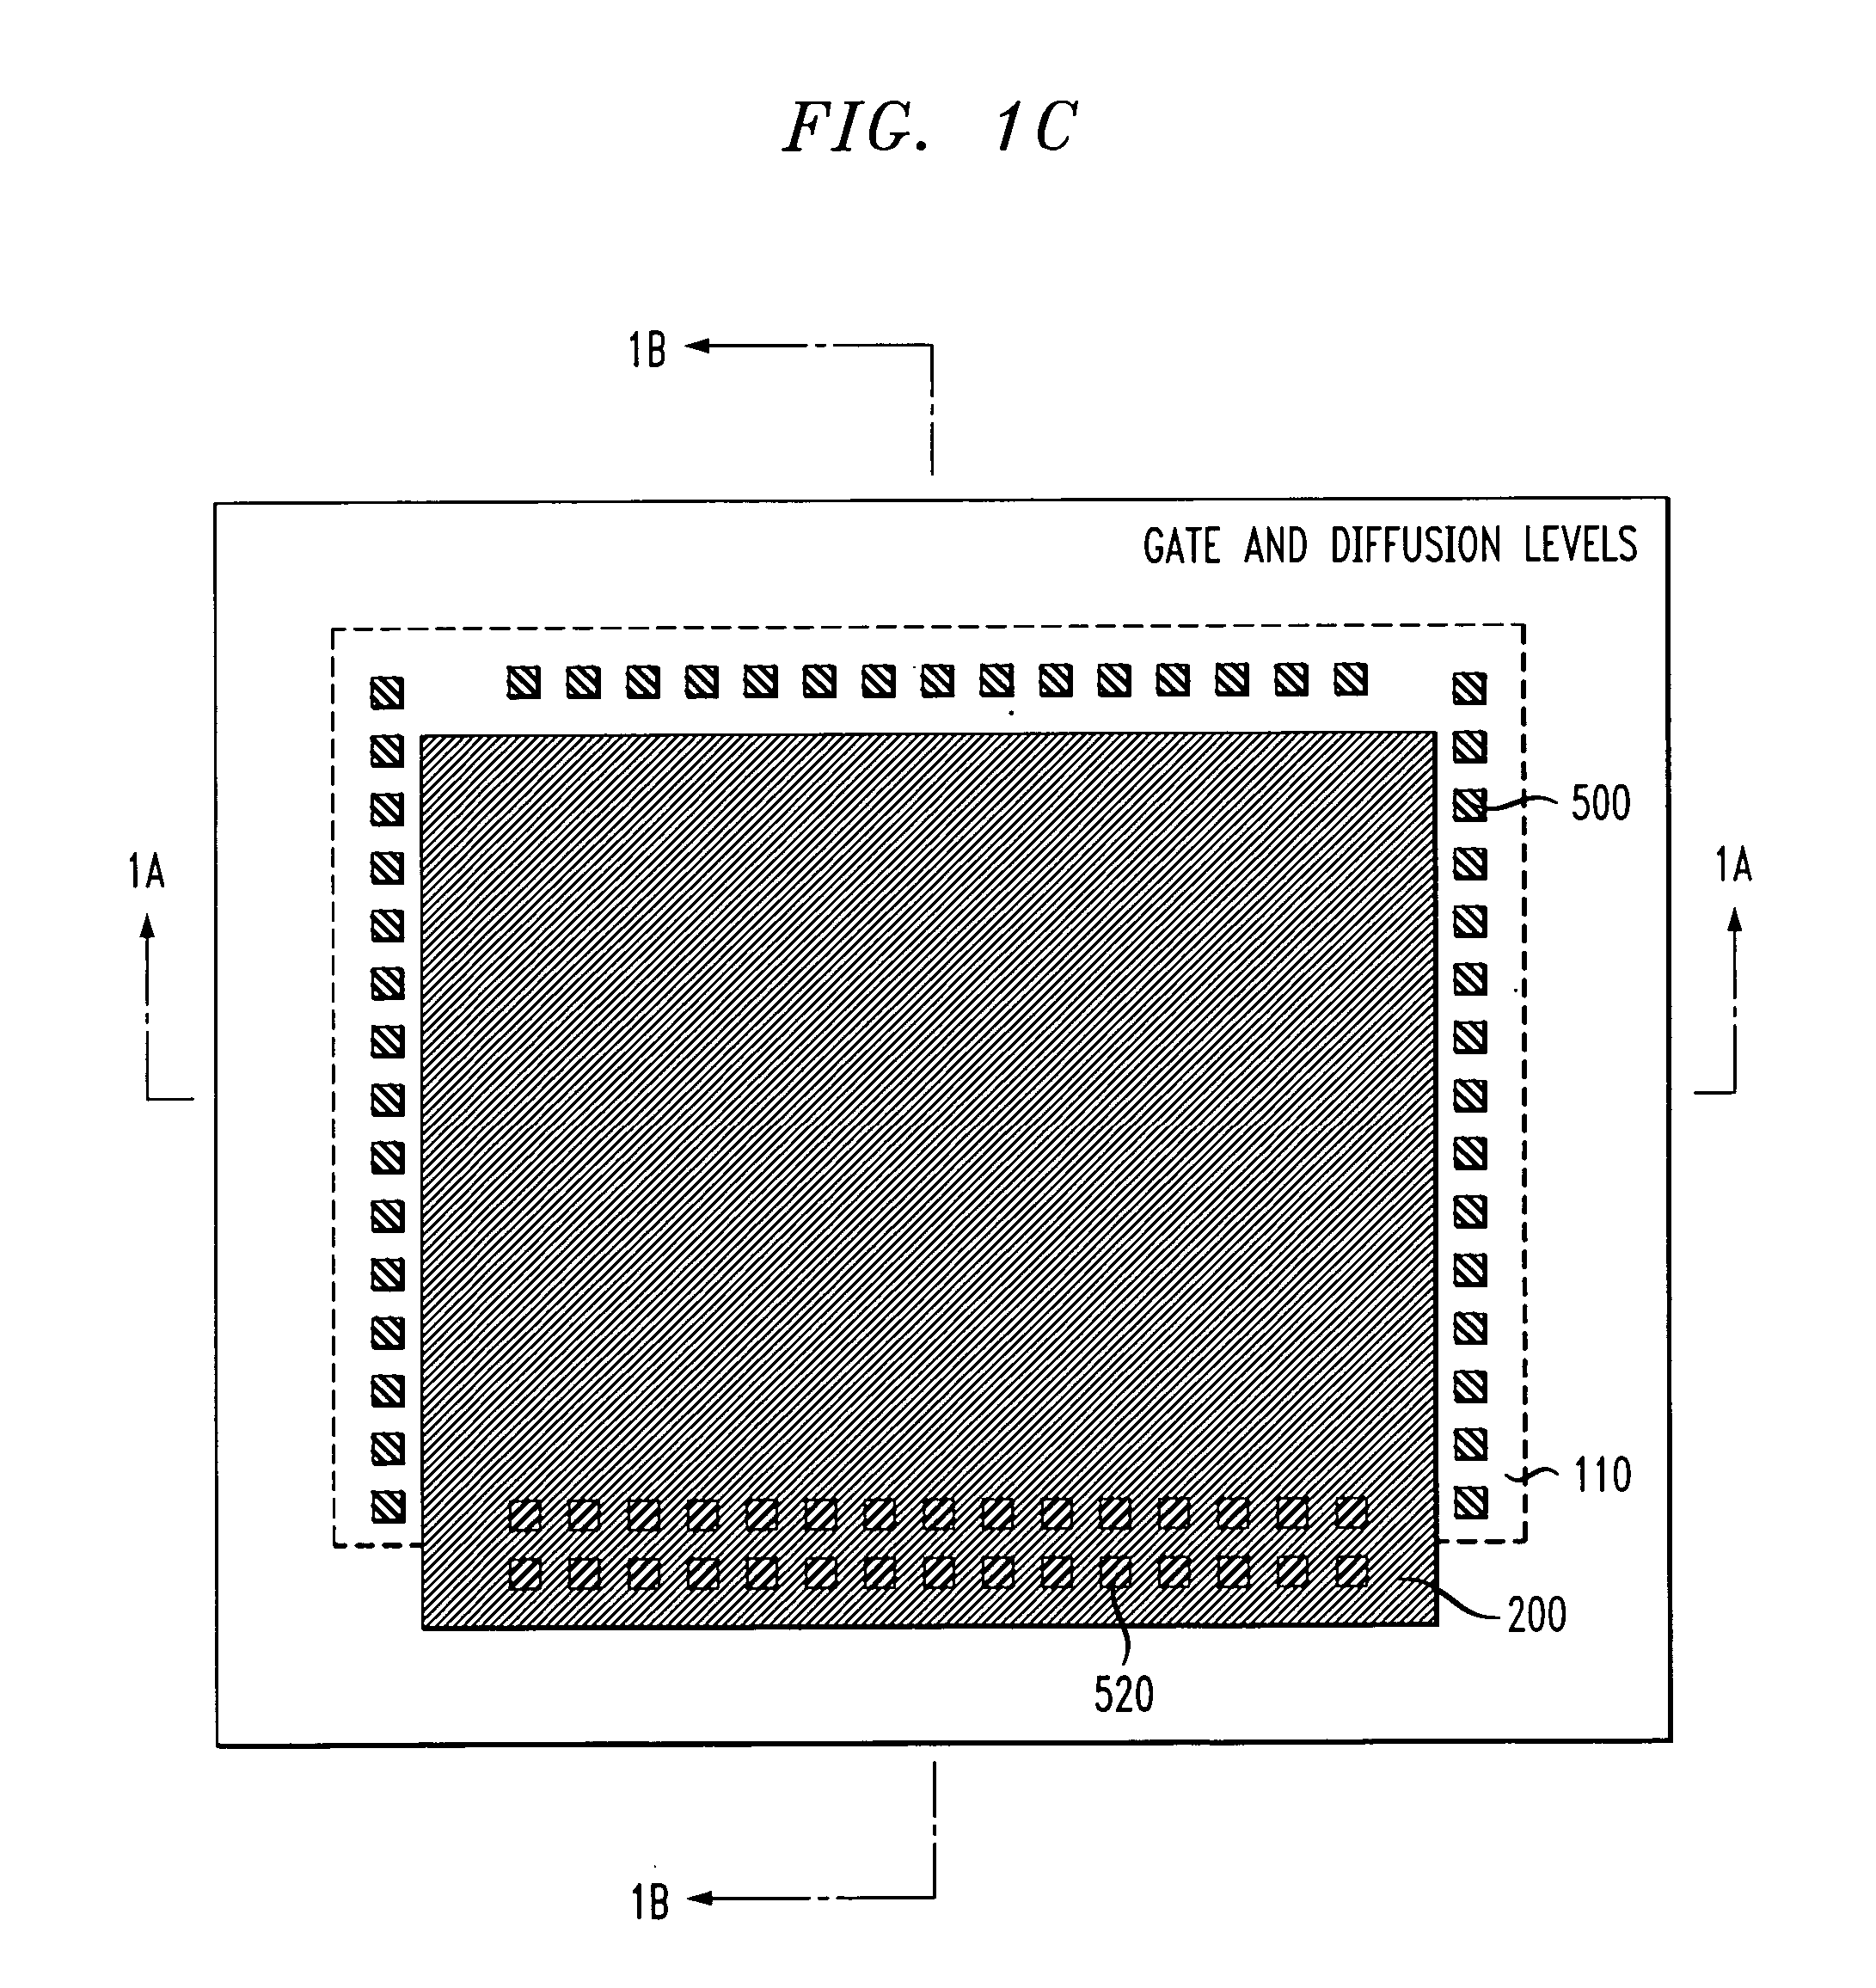 Metal capacitor stacked with a MOS capacitor to provide increased capacitance density